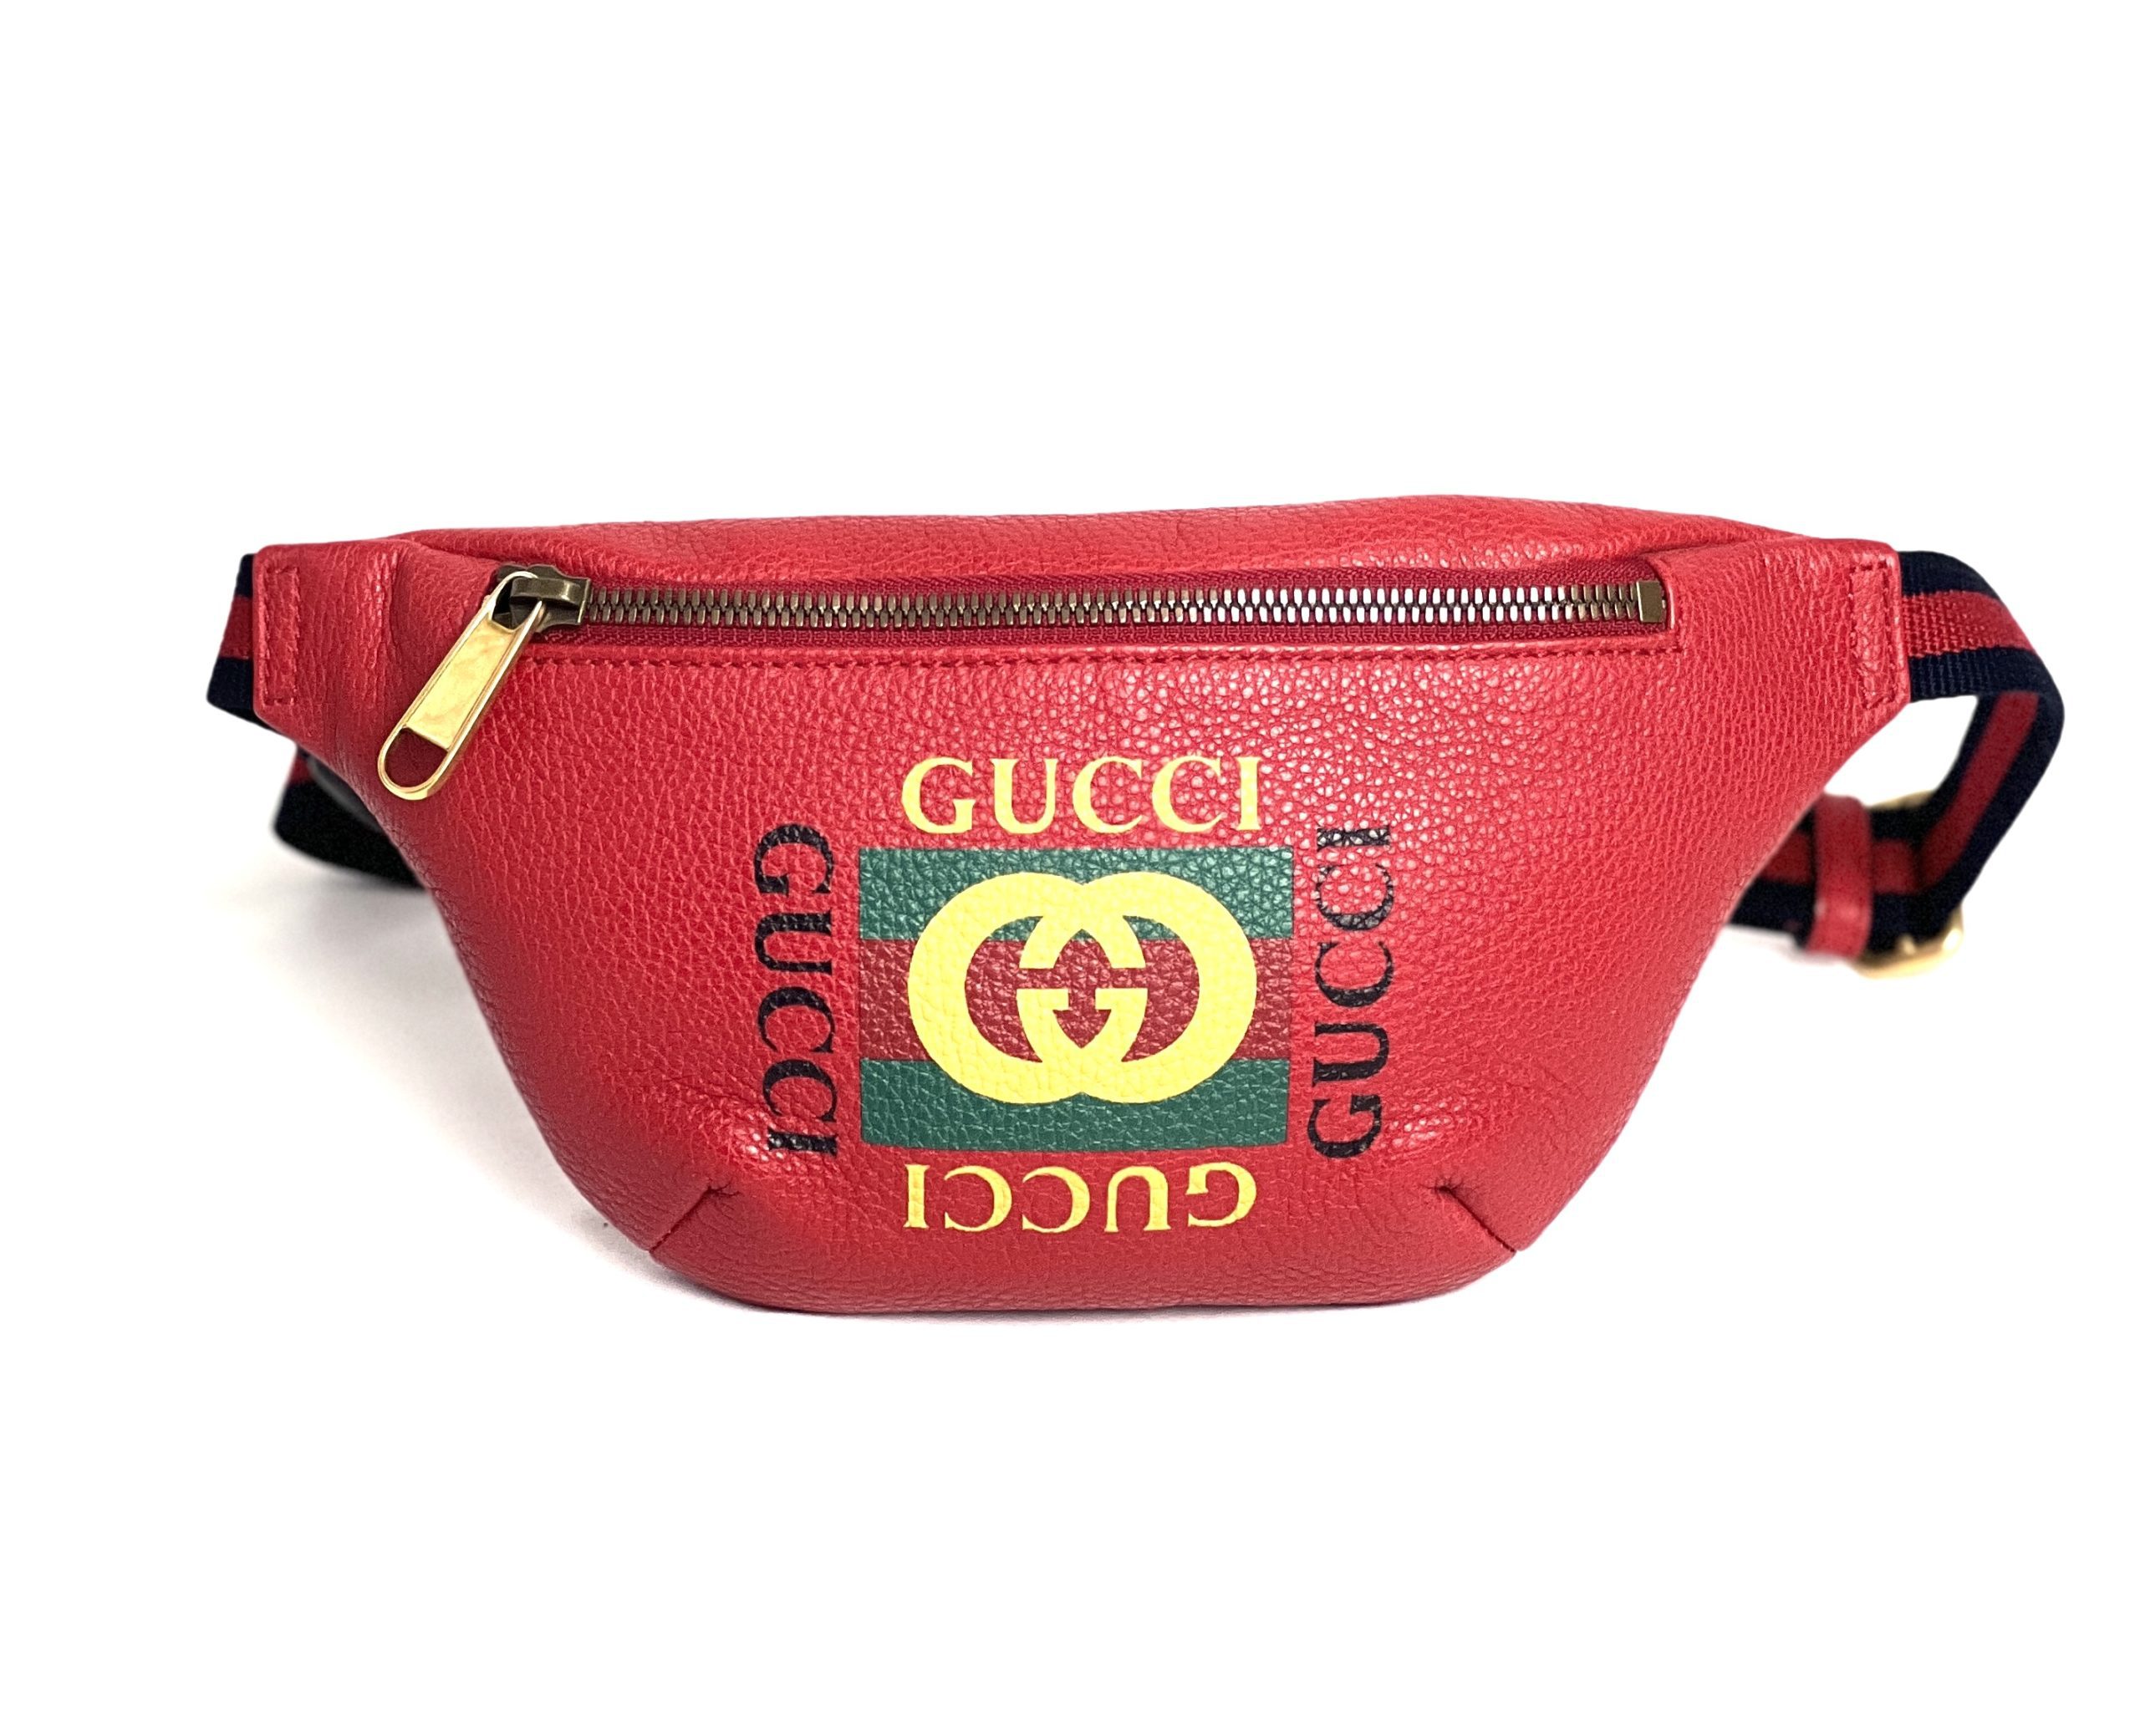 😎Authentic GUCCI Logo BELT Small Black/ Green/ Red BAG + Authenticity Card